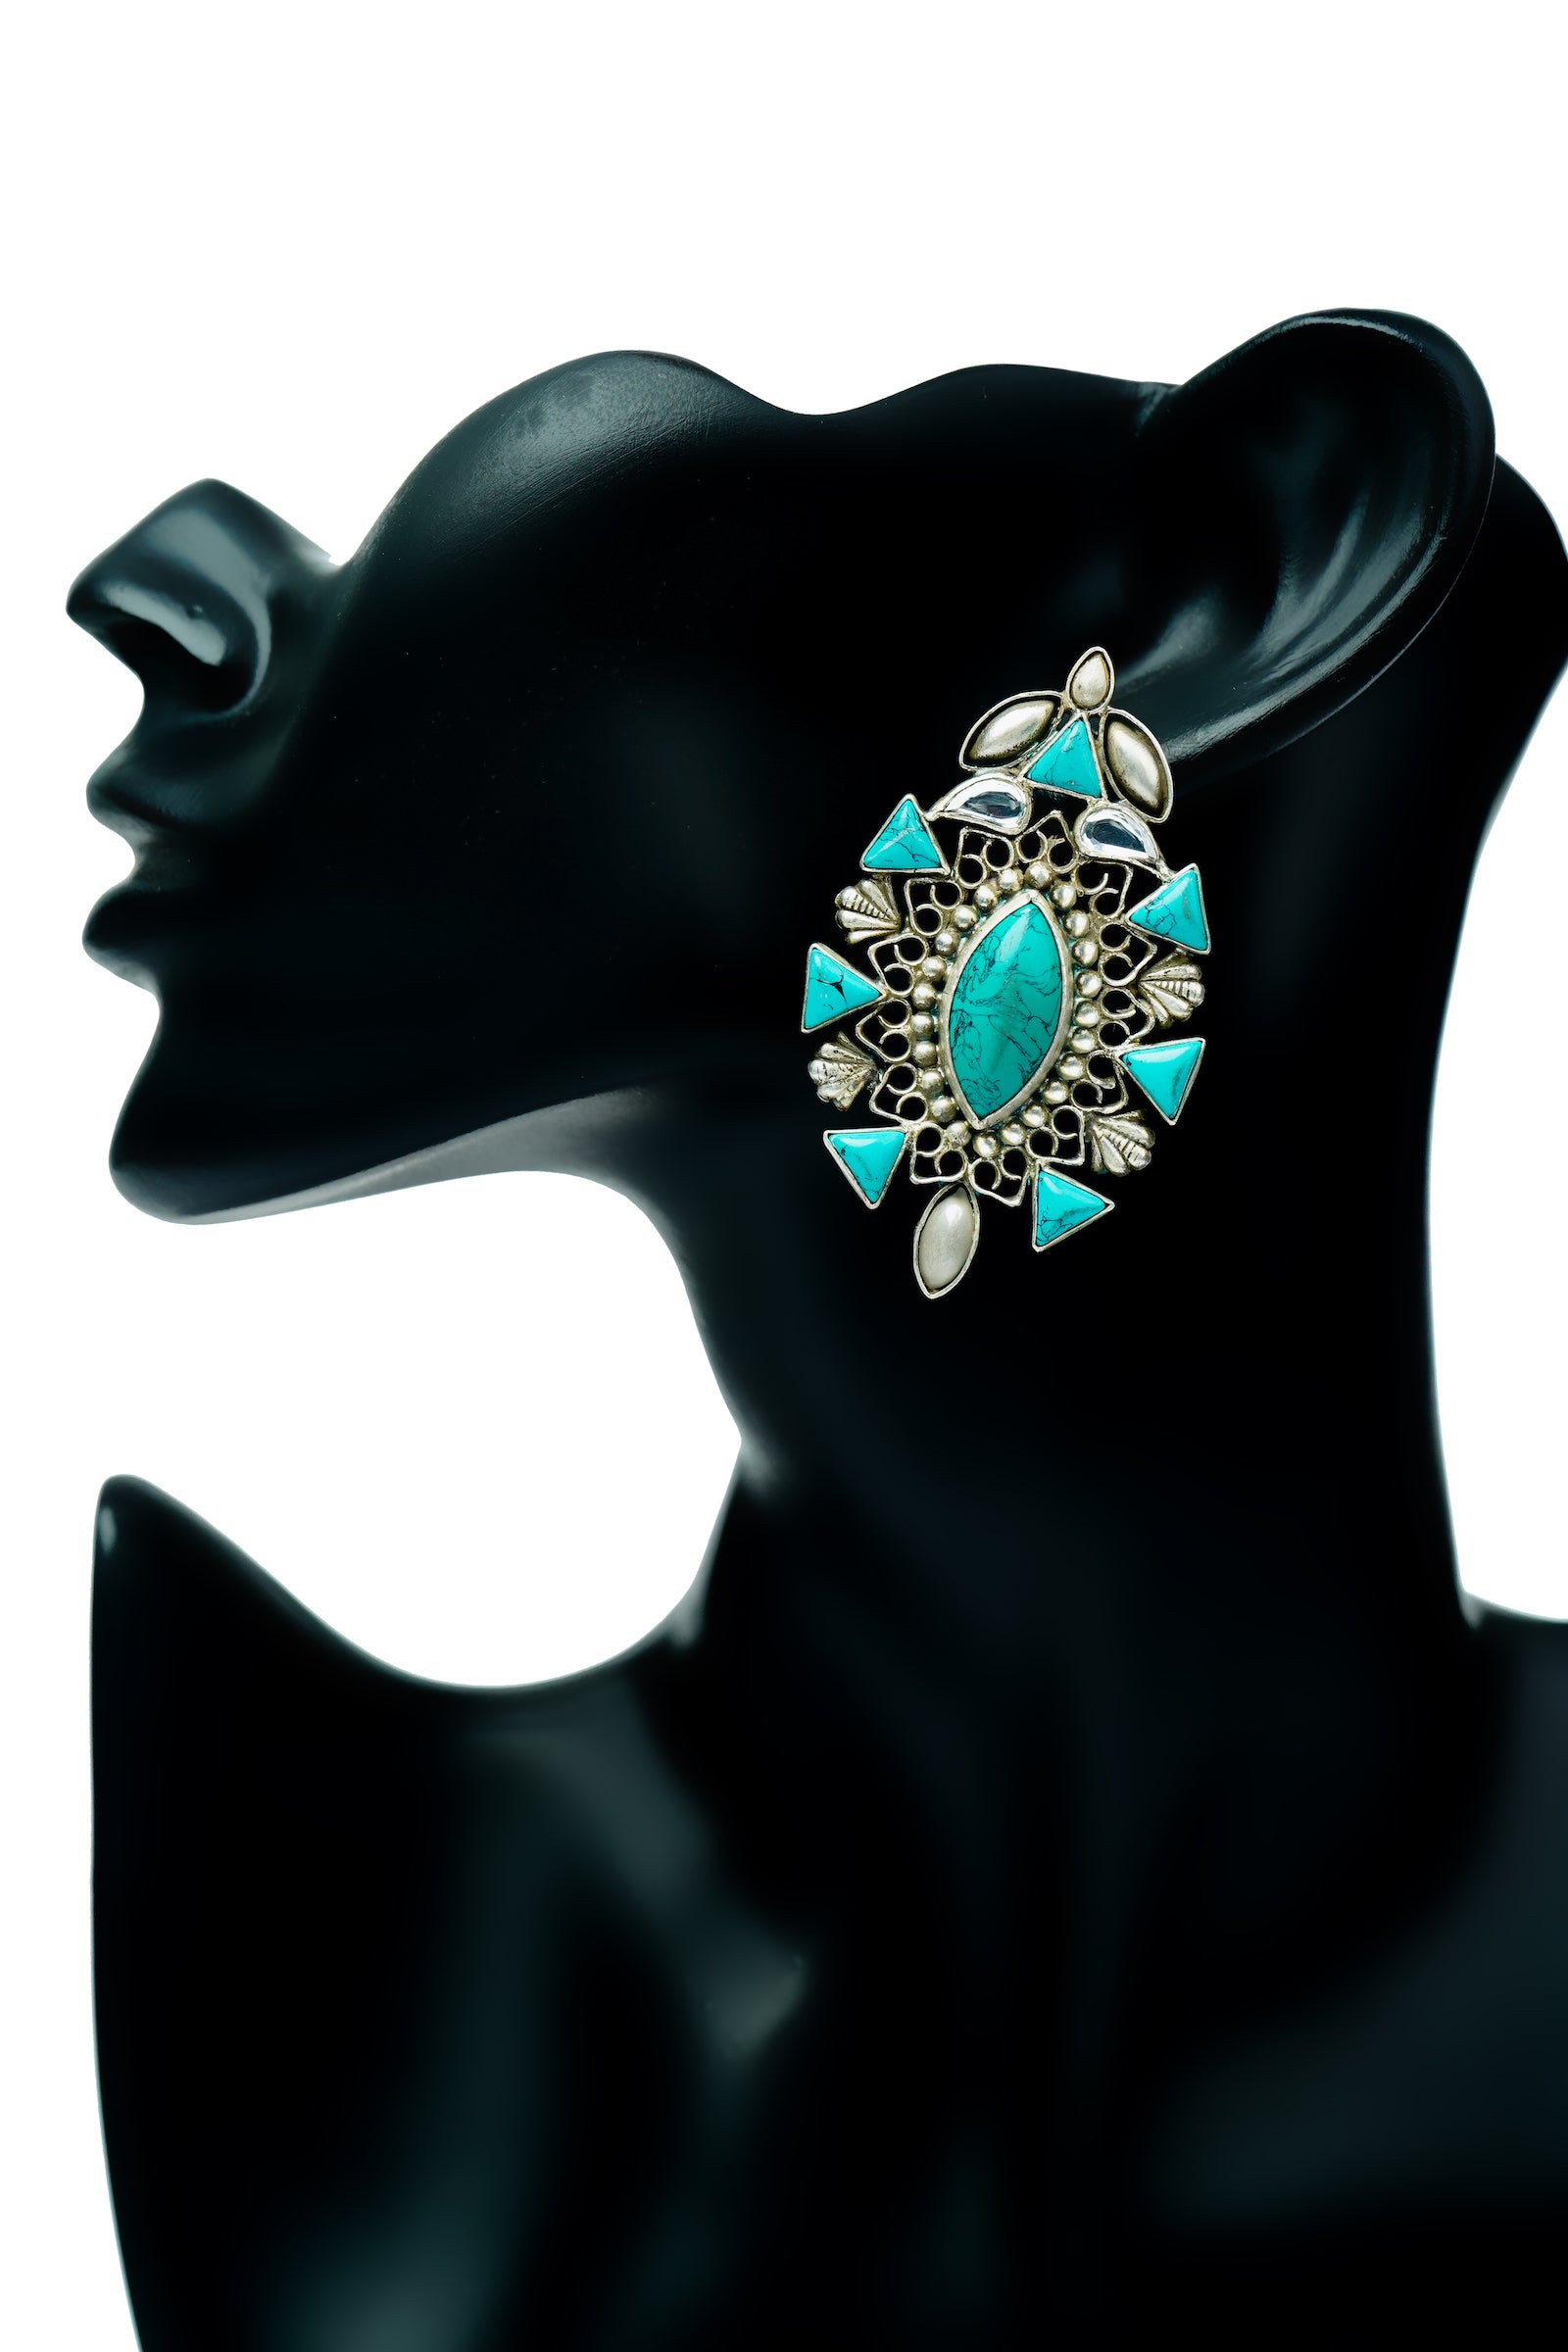 Silver Stud Earrings with Turquoise and Pearls - Neeta Boochra Jewellery